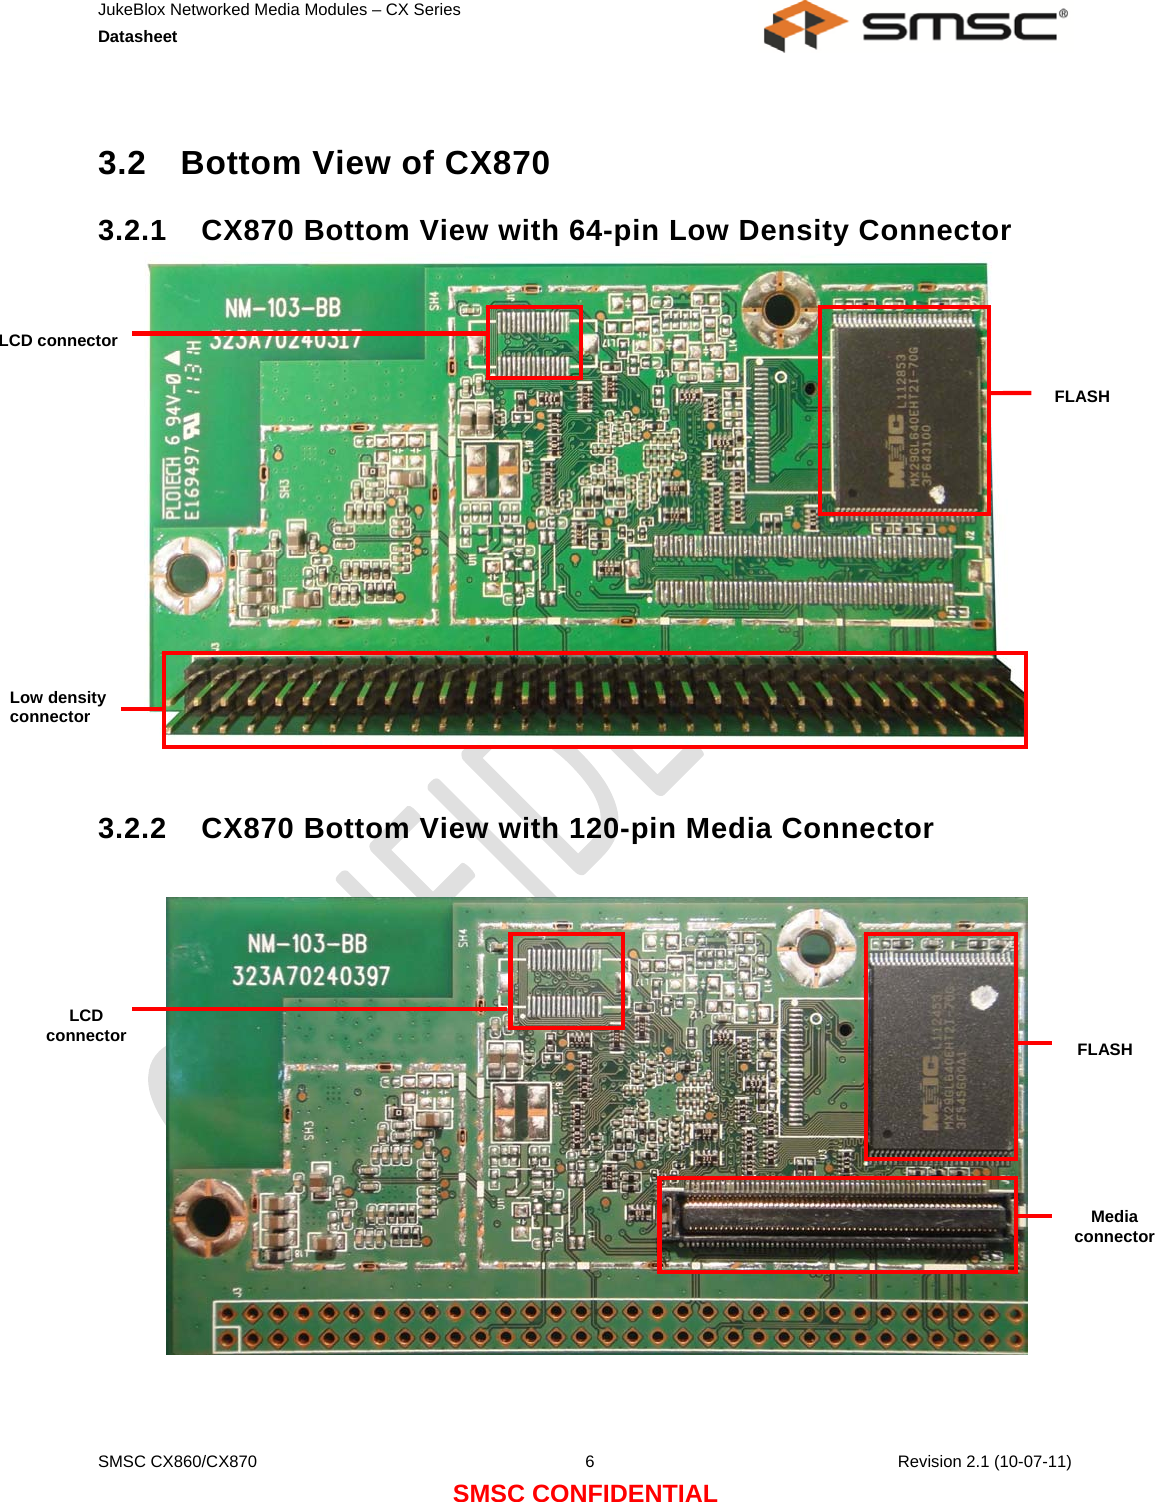 JukeBlox Networked Media Modules – CX Series  Datasheet    SMSC CX860/CX870  6    Revision 2.1 (10-07-11) SMSC CONFIDENTIAL  3.2  Bottom View of CX870 3.2.1  CX870 Bottom View with 64-pin Low Density Connector                3.2.2  CX870 Bottom View with 120-pin Media Connector                LCD connector FLASH Media connector LCD connector  FLASH Low density connector 